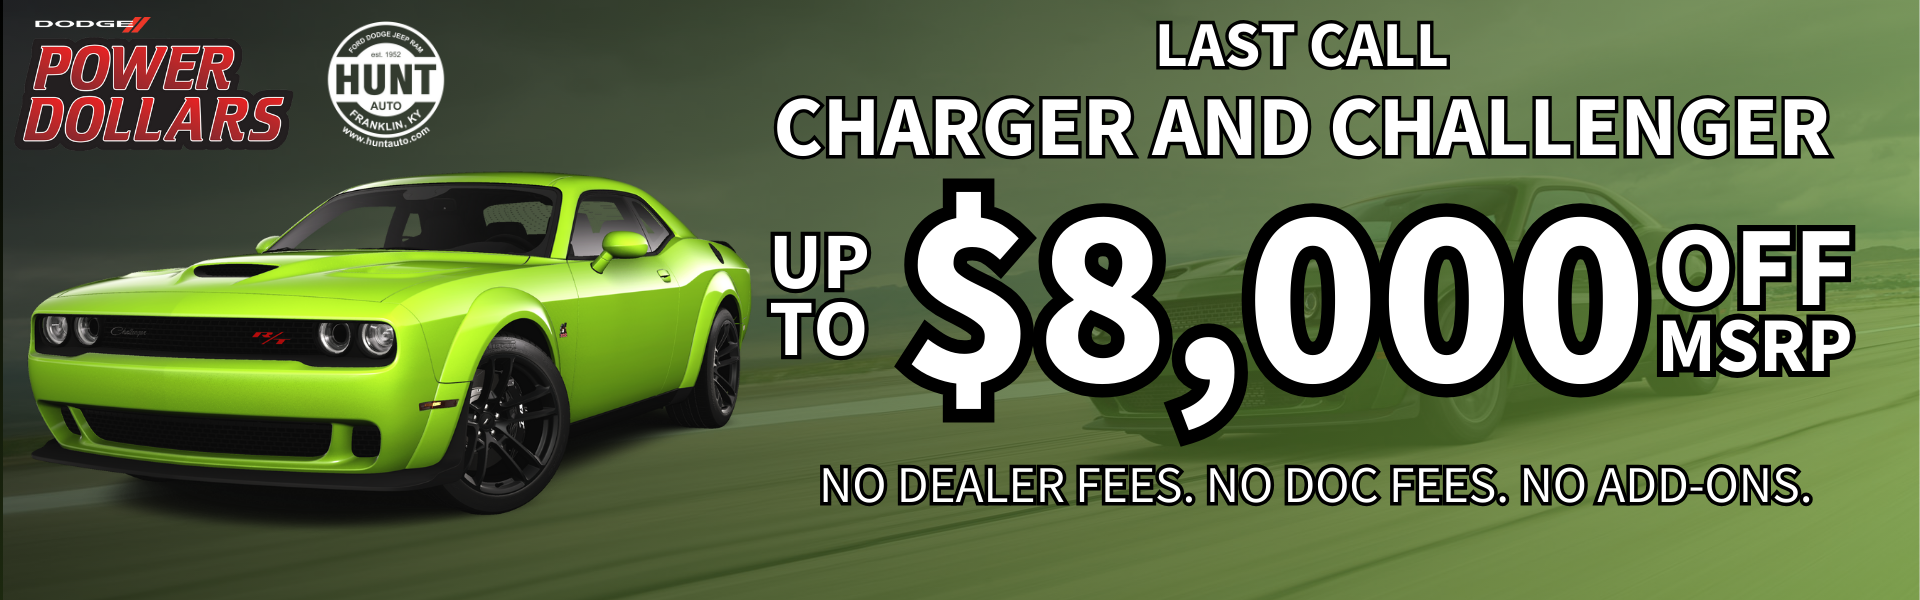 Up to $8,000 OFF MSRP on Charger and Challenger